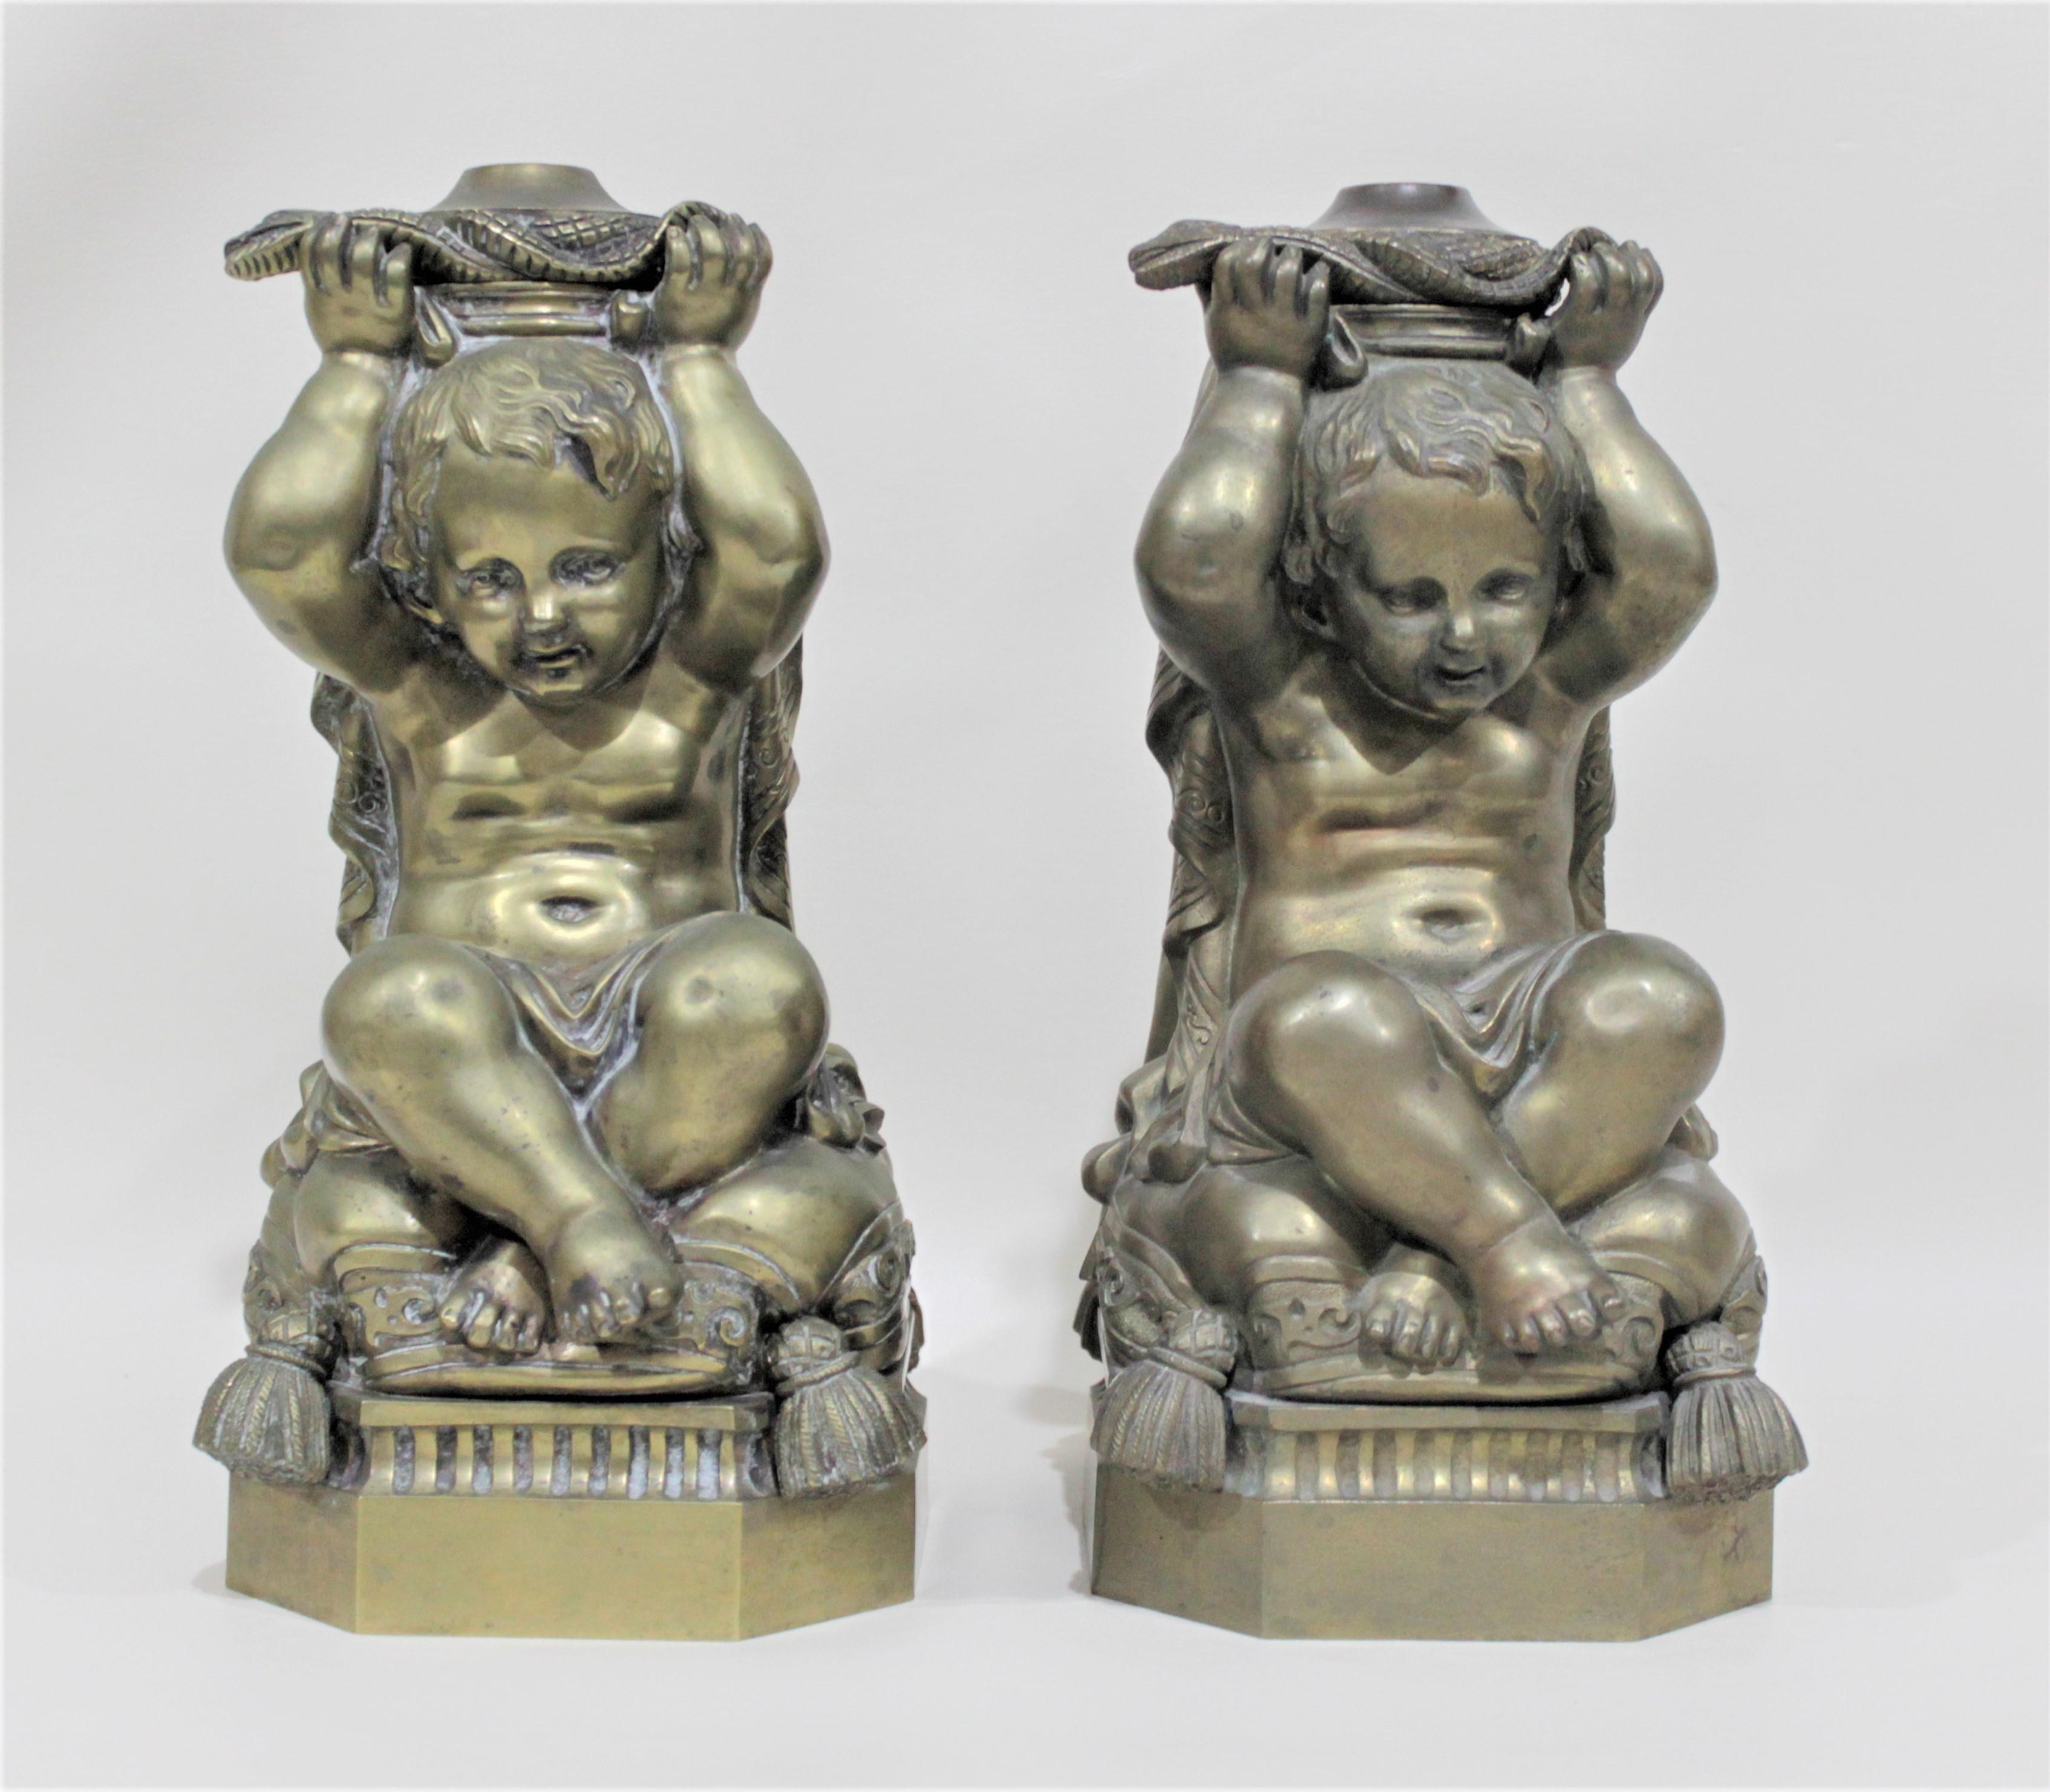 This matched pair of solid cast bronze figural cherub oil lamp bases are unmarked, but presumed to be made in the United States during the Victorian period. The bases are very detailed in their casting on all four sides and feature figural snakes or